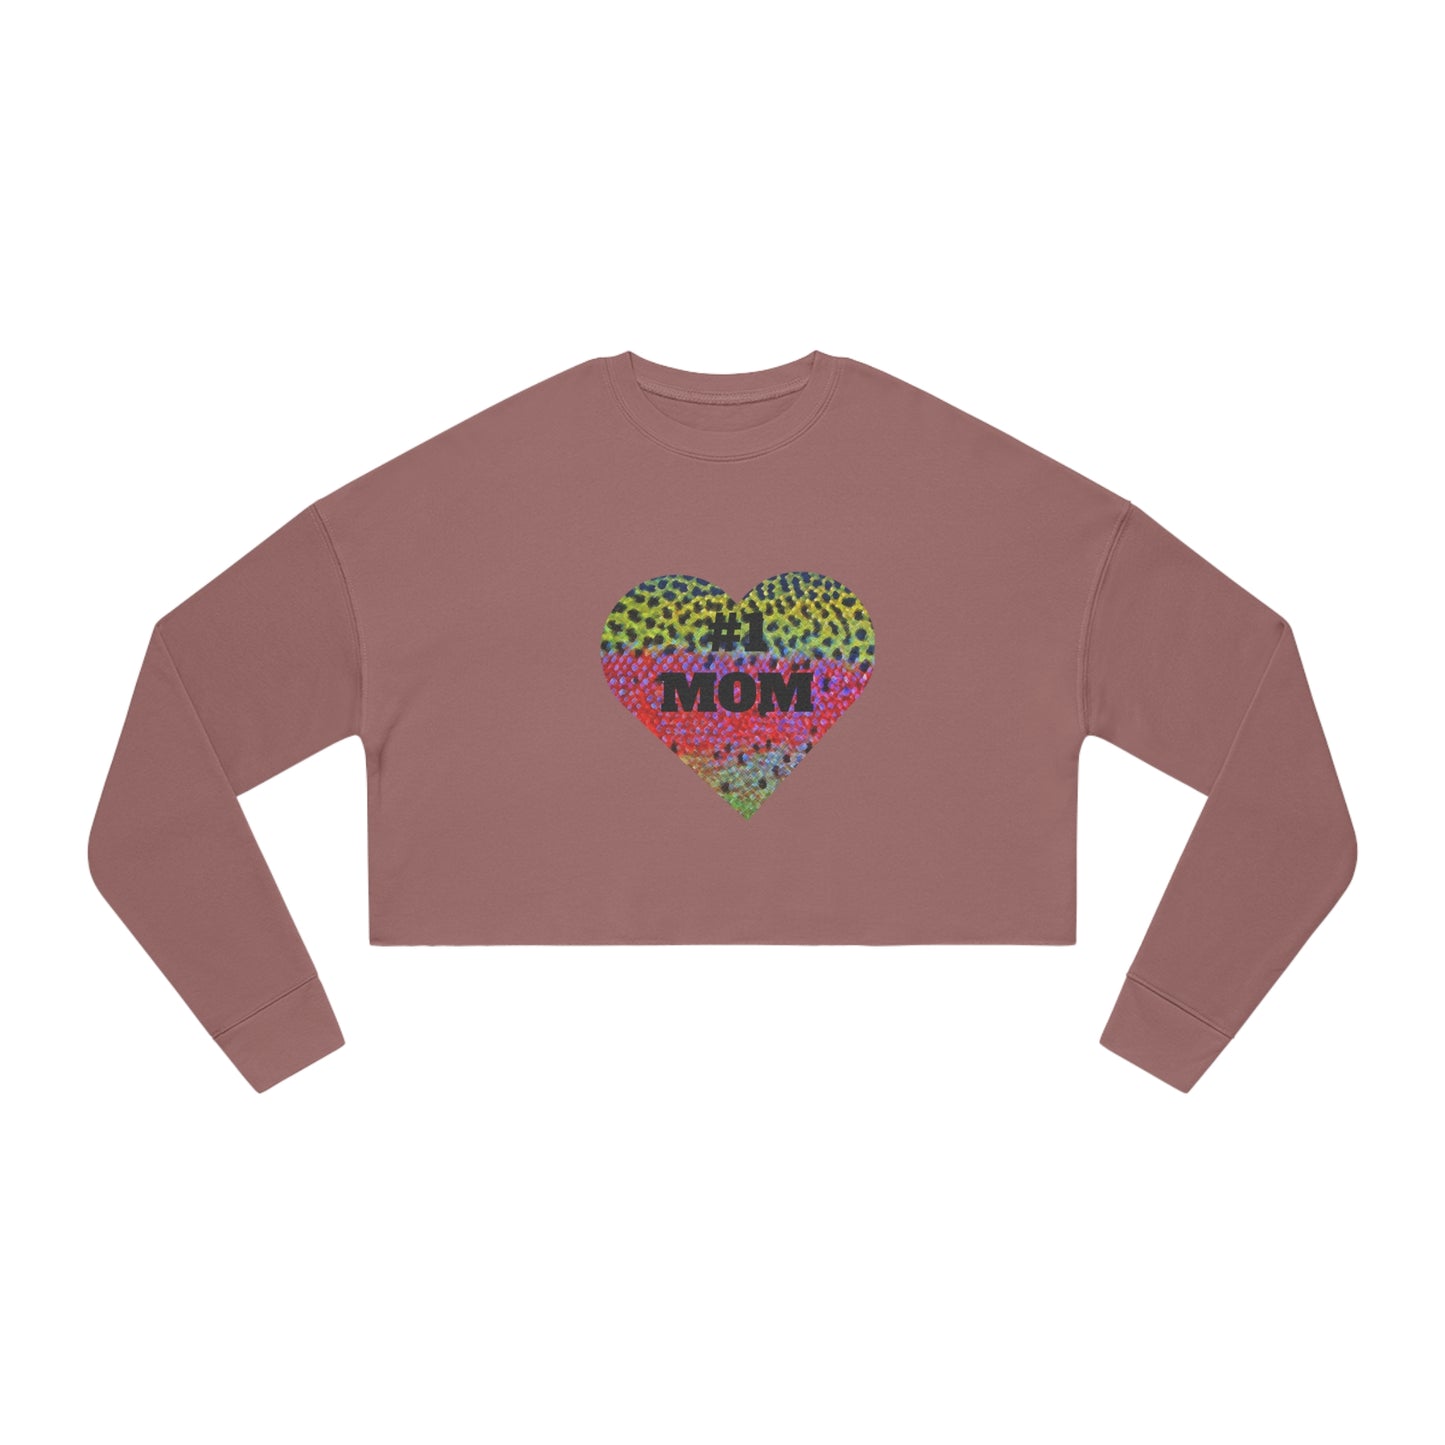 Mothers Day Shirt, Crop Top For Mom, Shirt for Fishing Girl